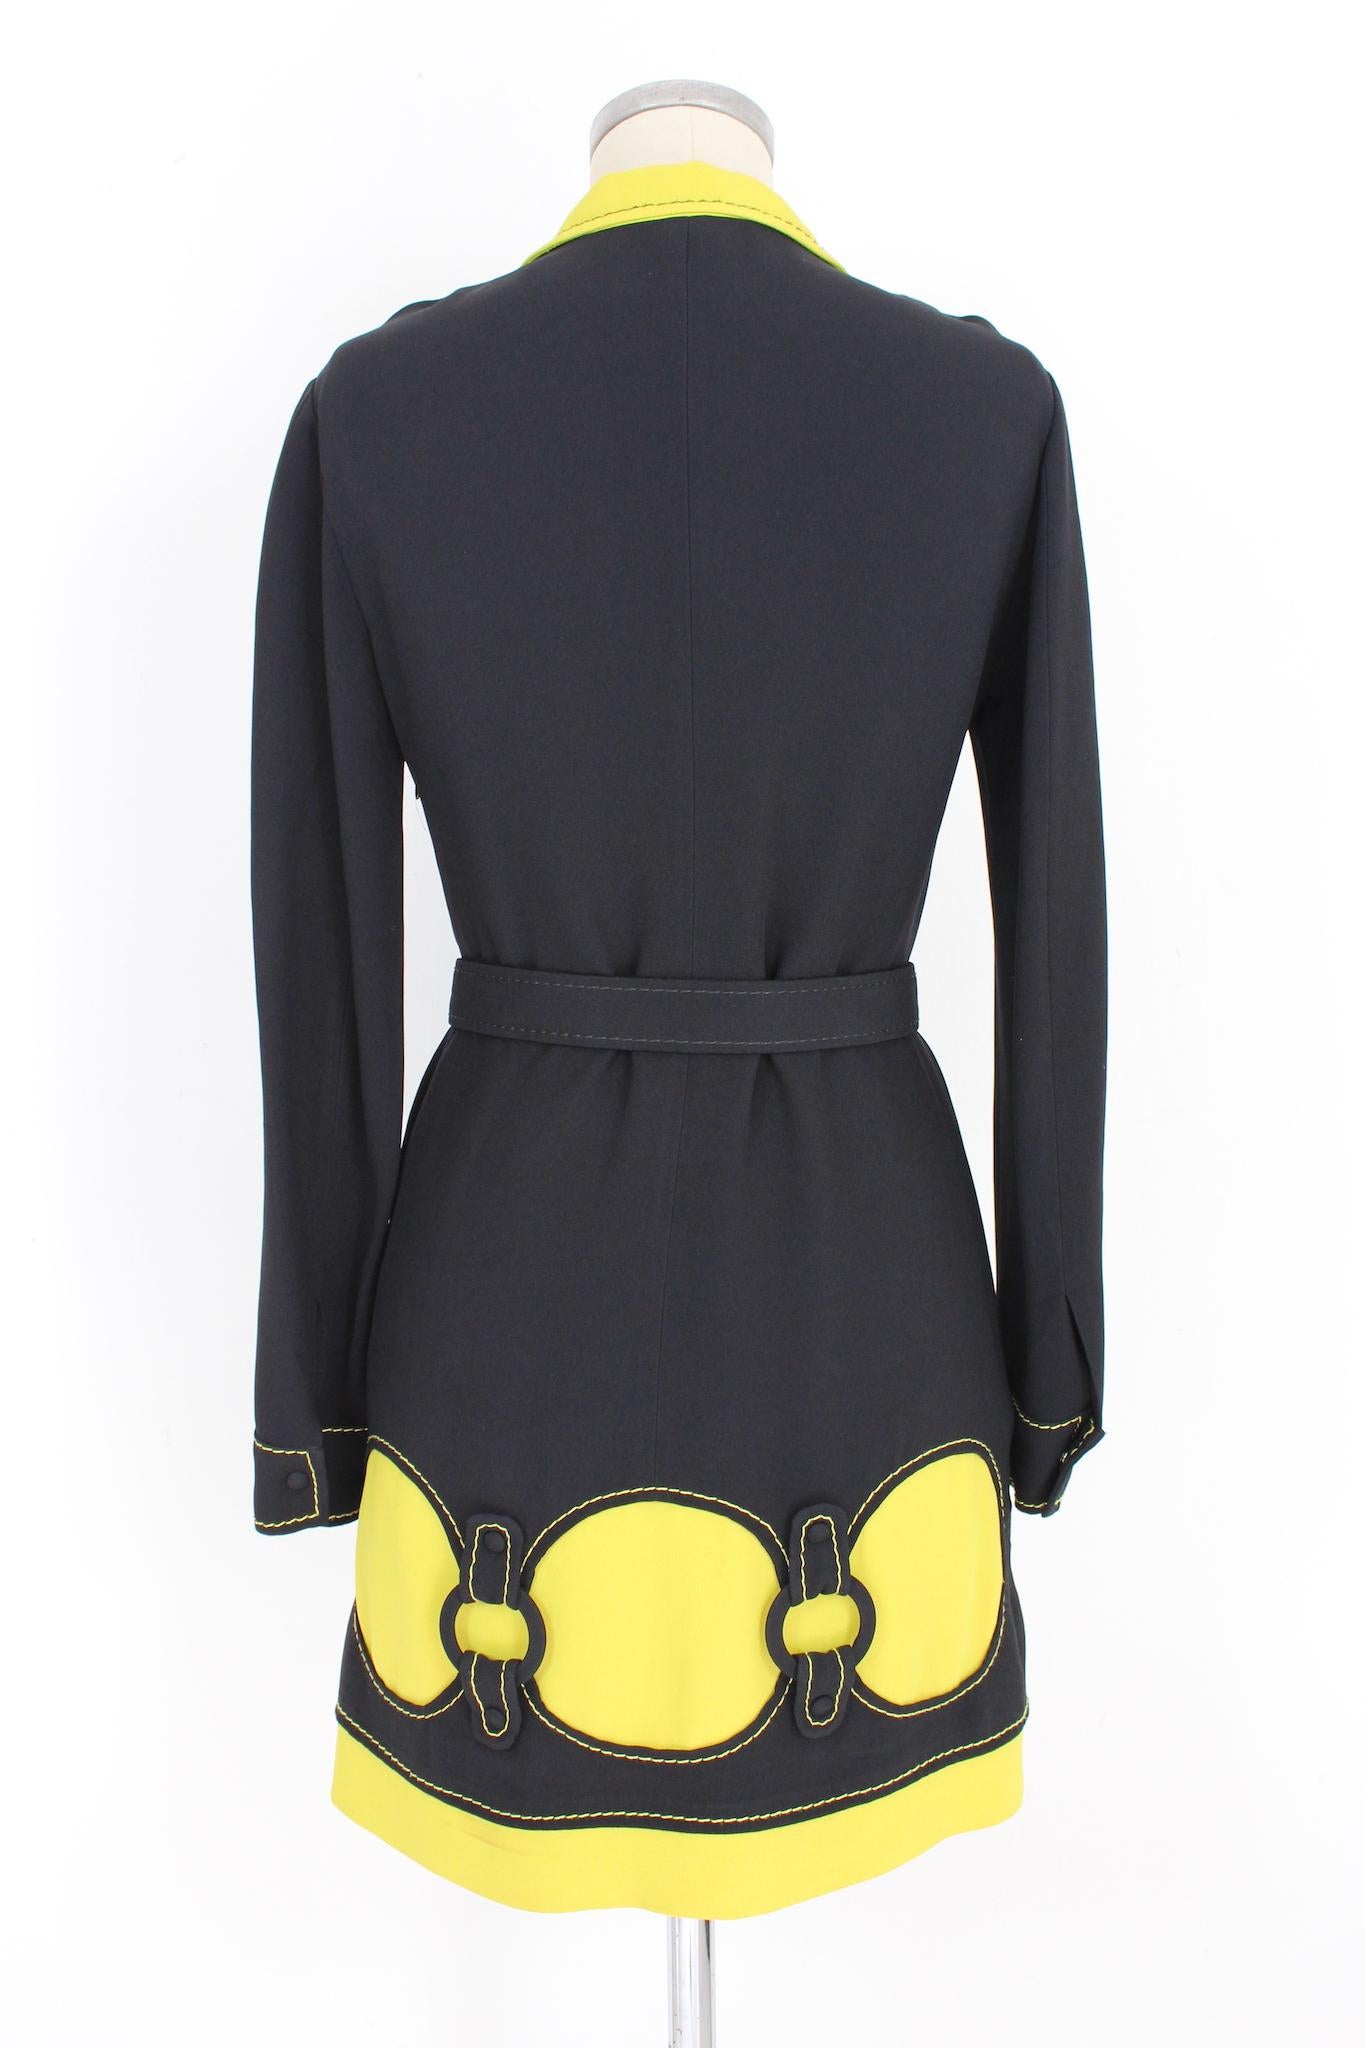 Moschino vintage 90s yellow and black dress. Short sheath dress with collar, black with yellow profiles, belt at the waist. Button closure and side zip. 52% rayon, 48% acetate fabric, internally lined. Made in Italy.

Size: 42 It 8 Us 10